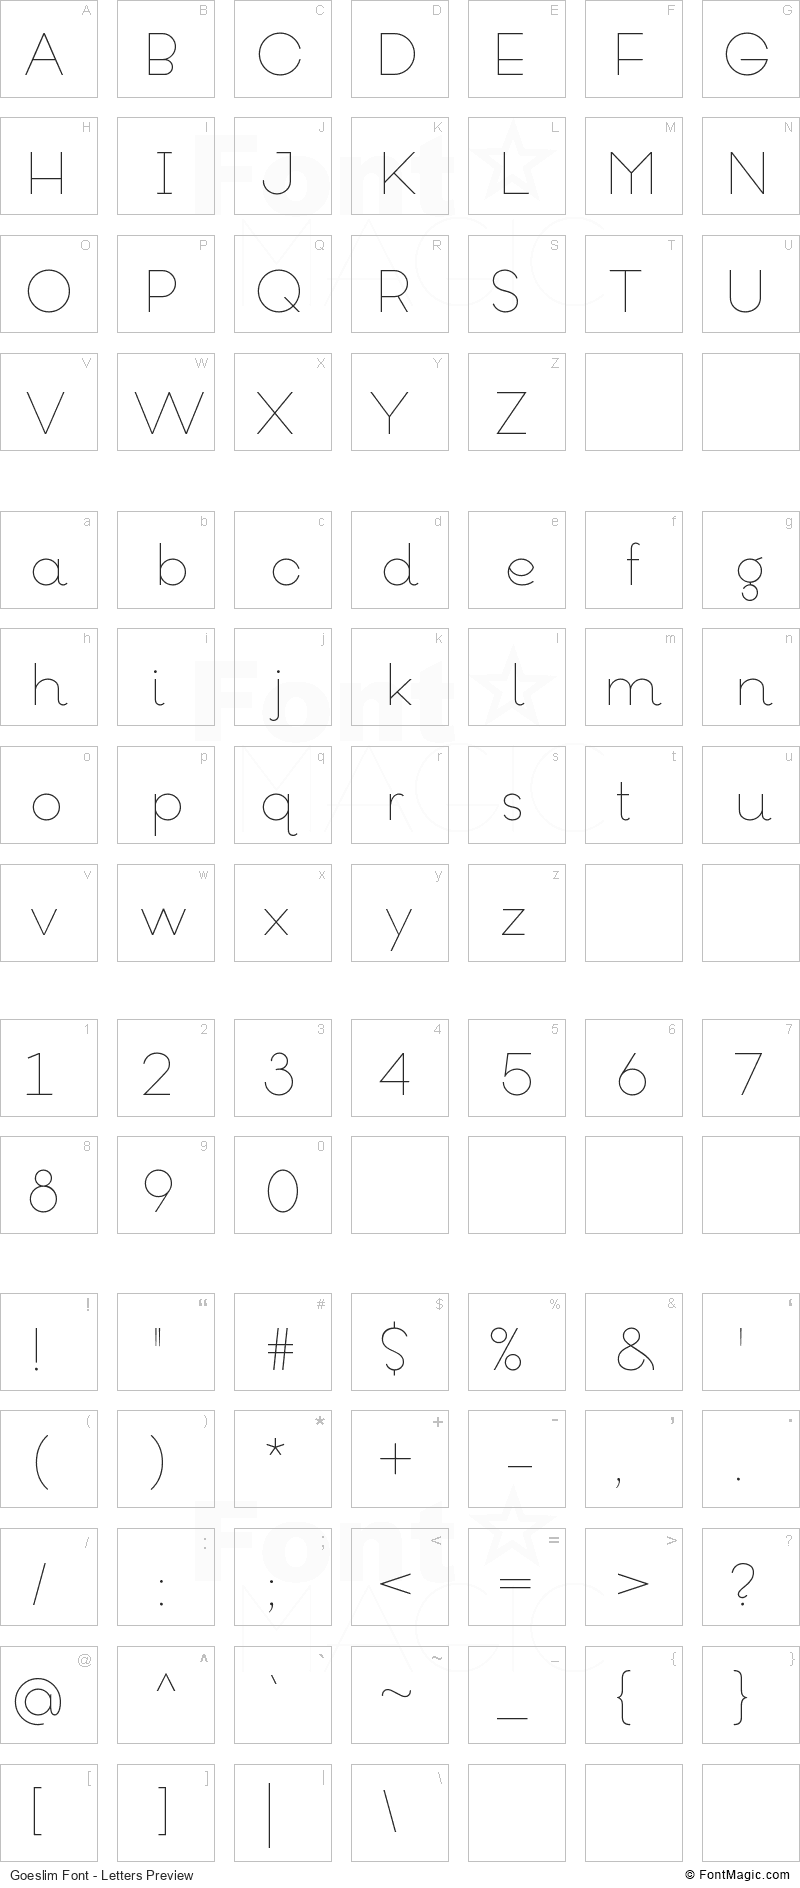 Goeslim Font - All Latters Preview Chart